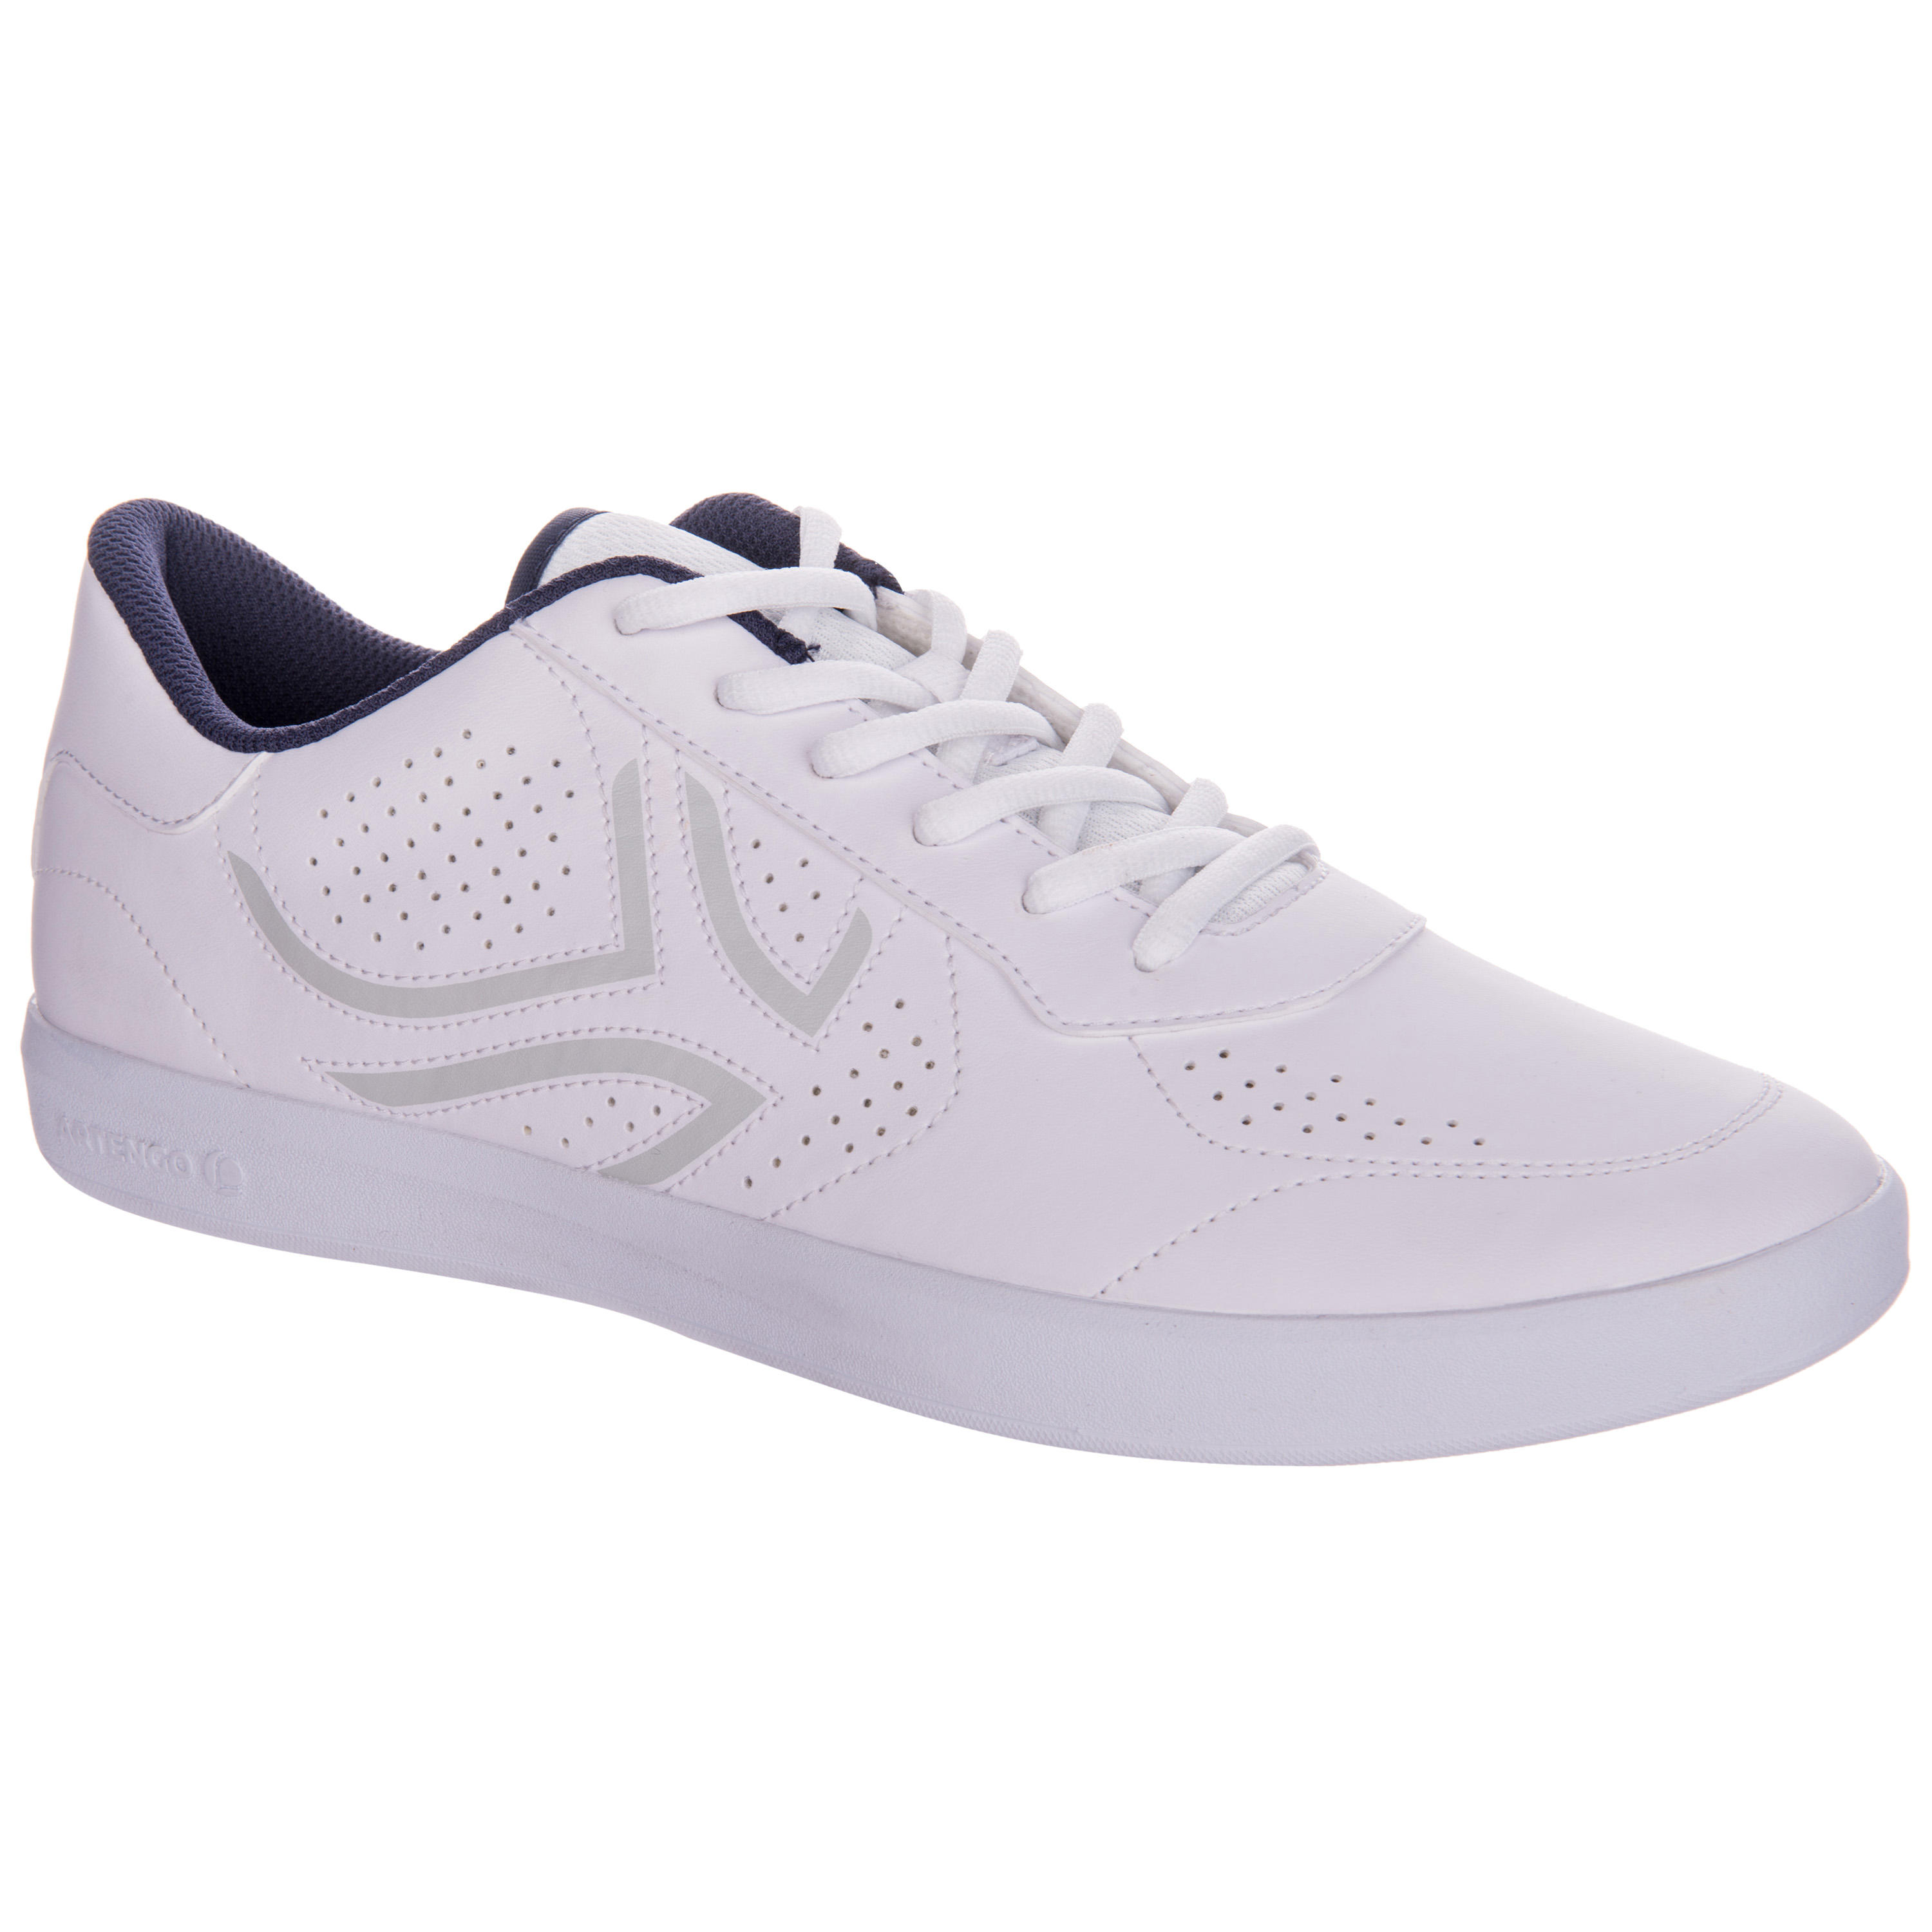 Sports Shoes | Decathlon Sports Shoes | Freeup